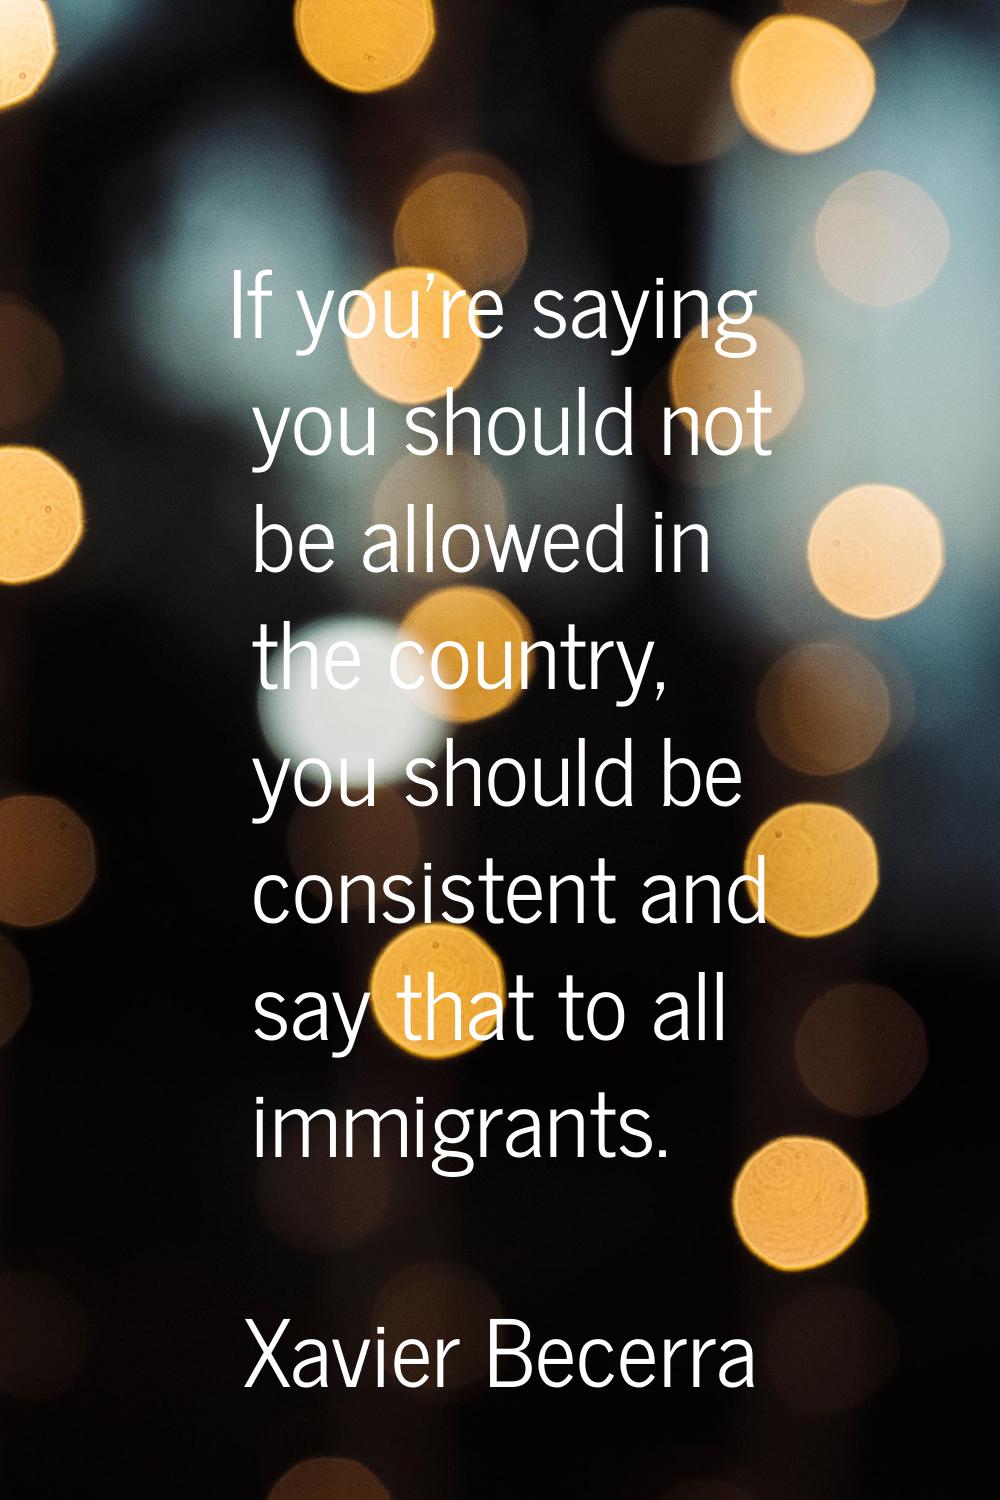 If you're saying you should not be allowed in the country, you should be consistent and say that to